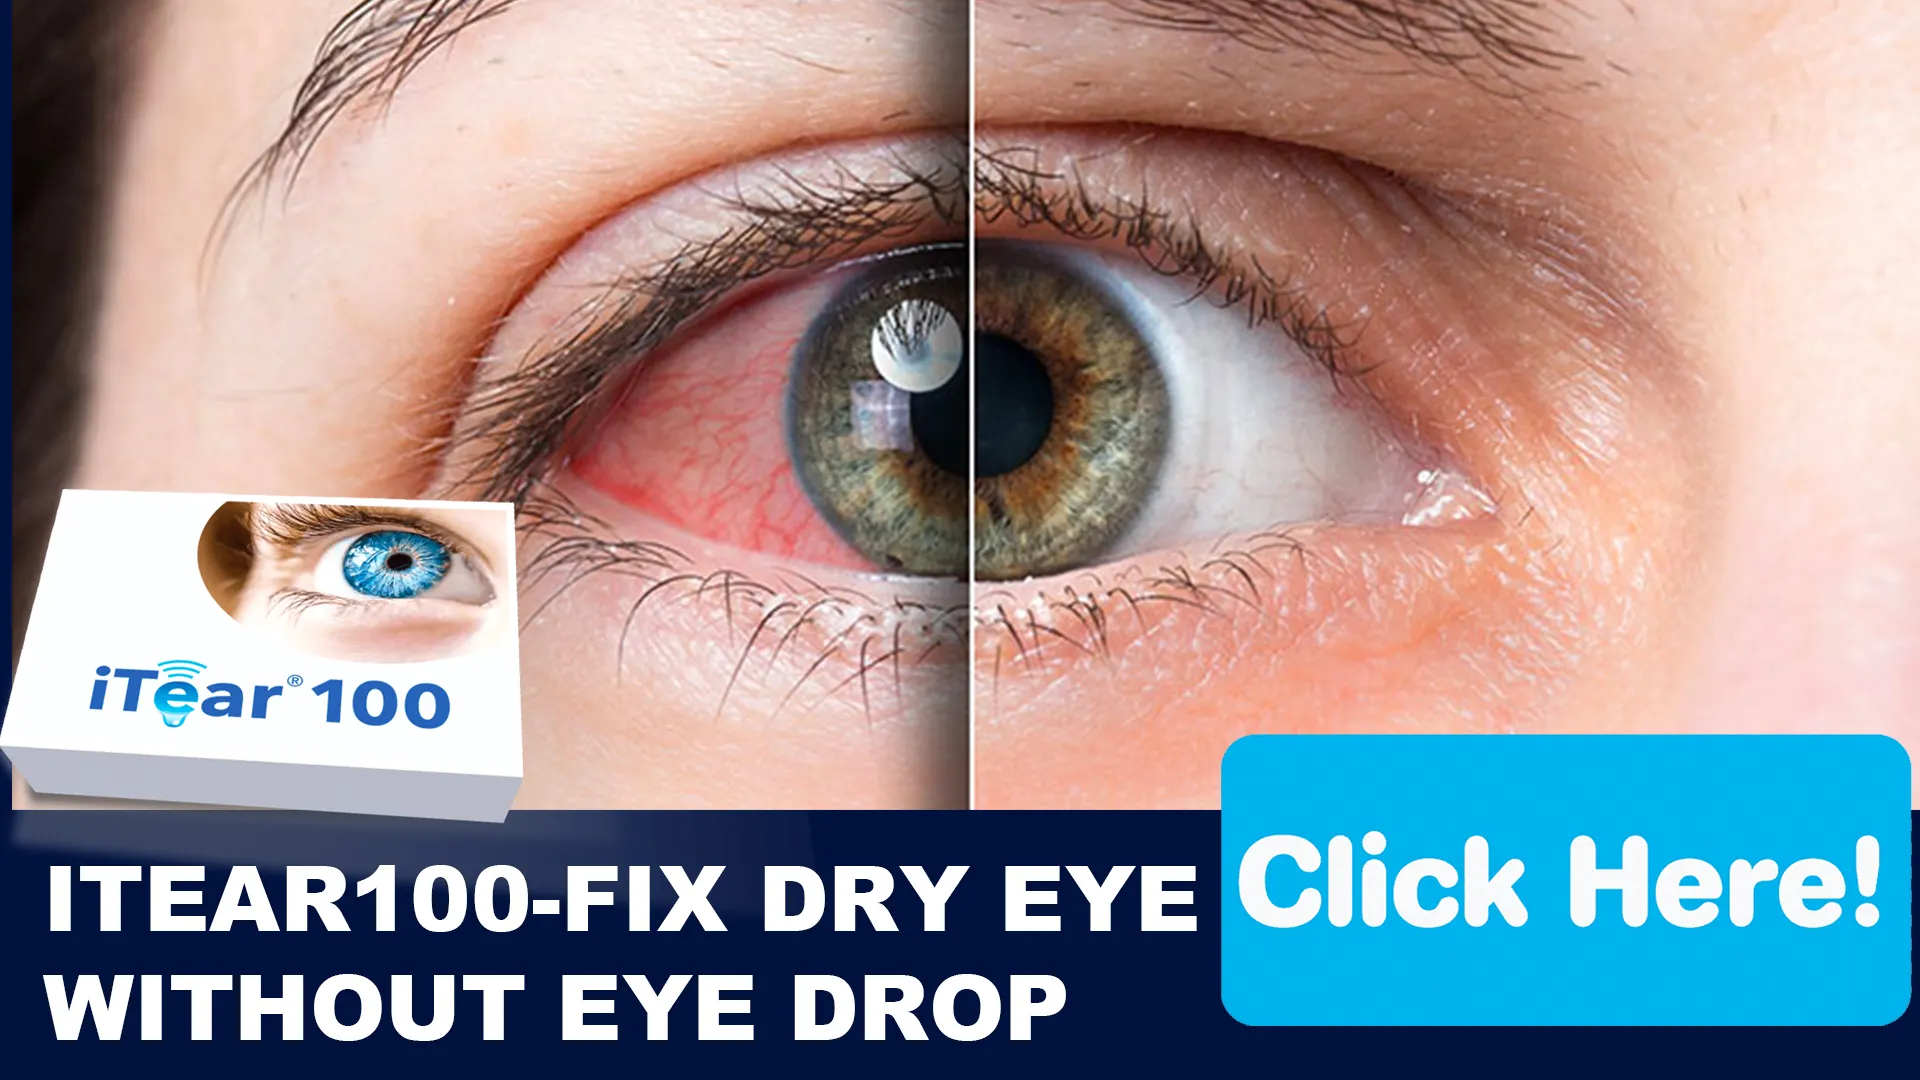 Why iTEAR100 Is a Revolutionary Solution for Dry Eyes